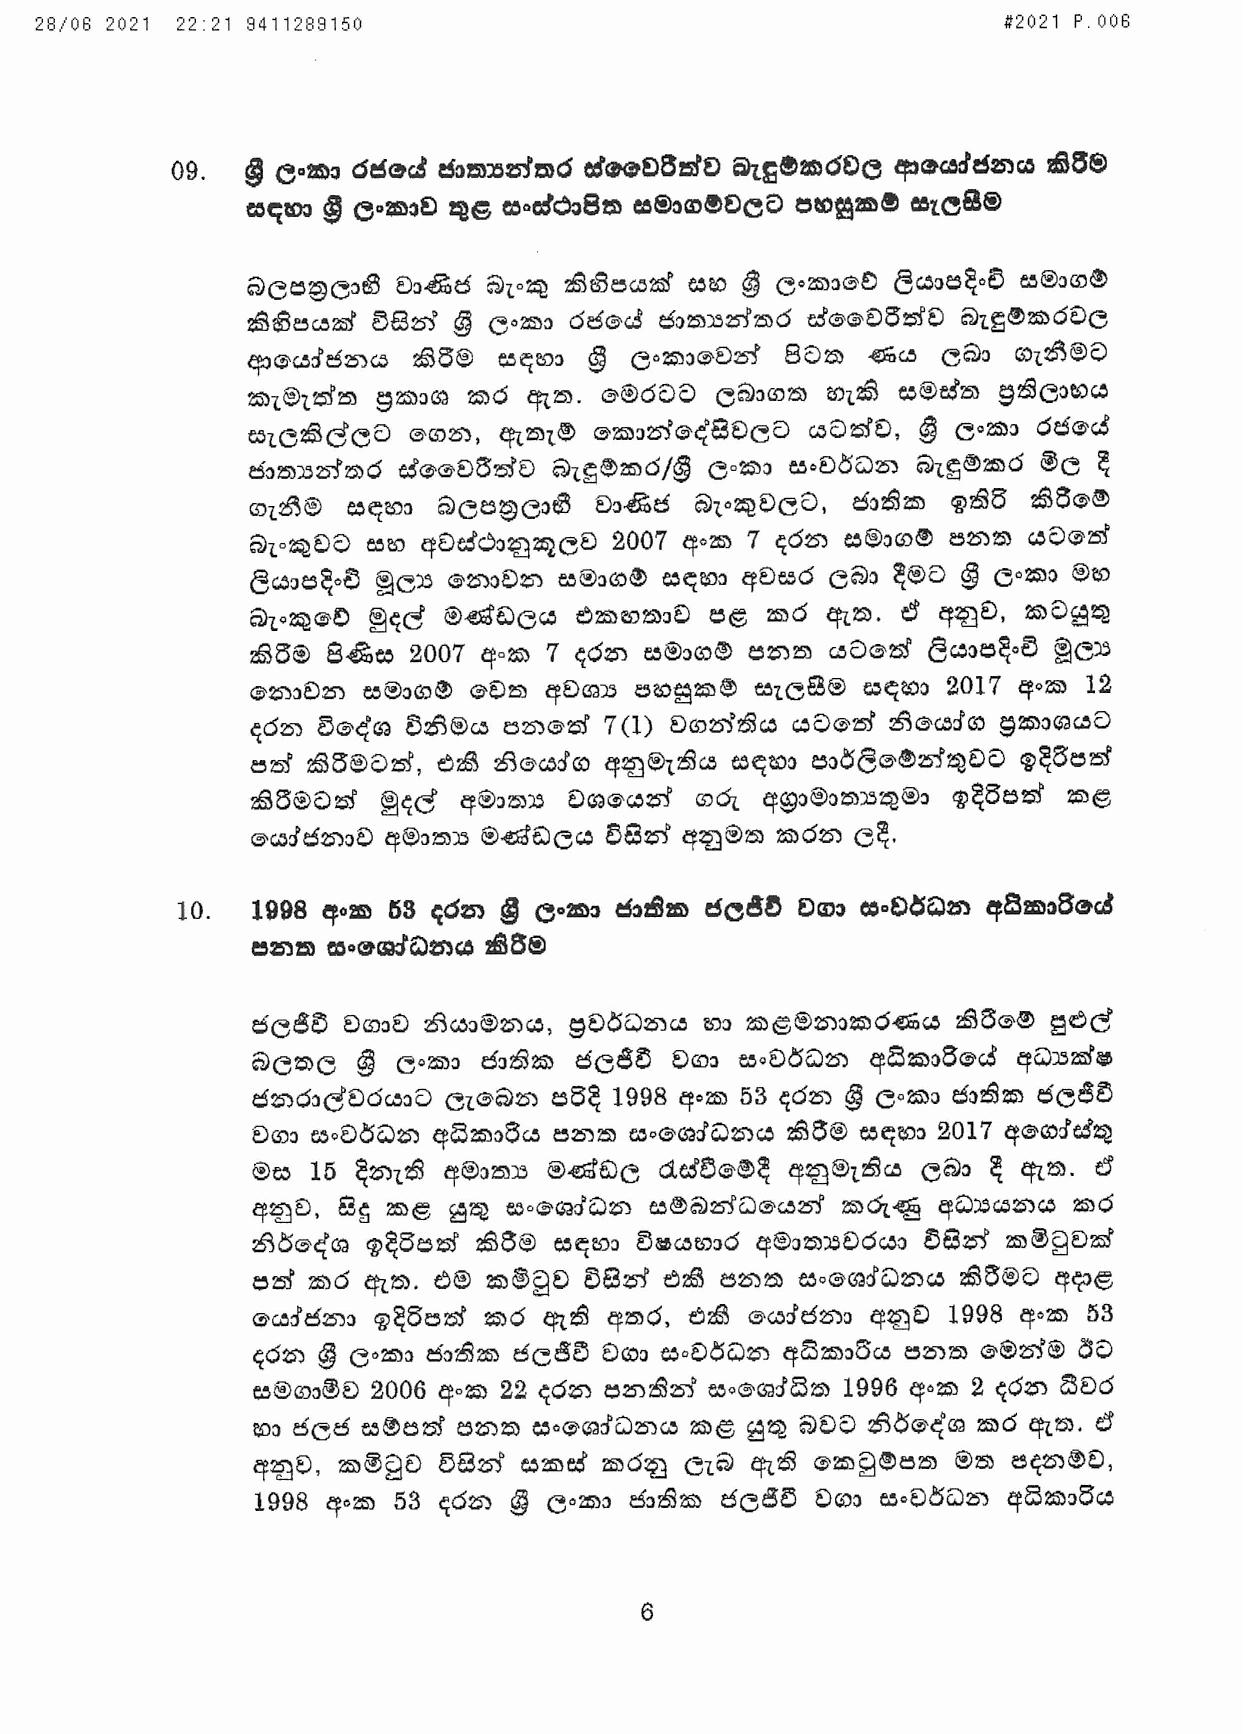 Cabinet Decision on 28.06.2021 page 006